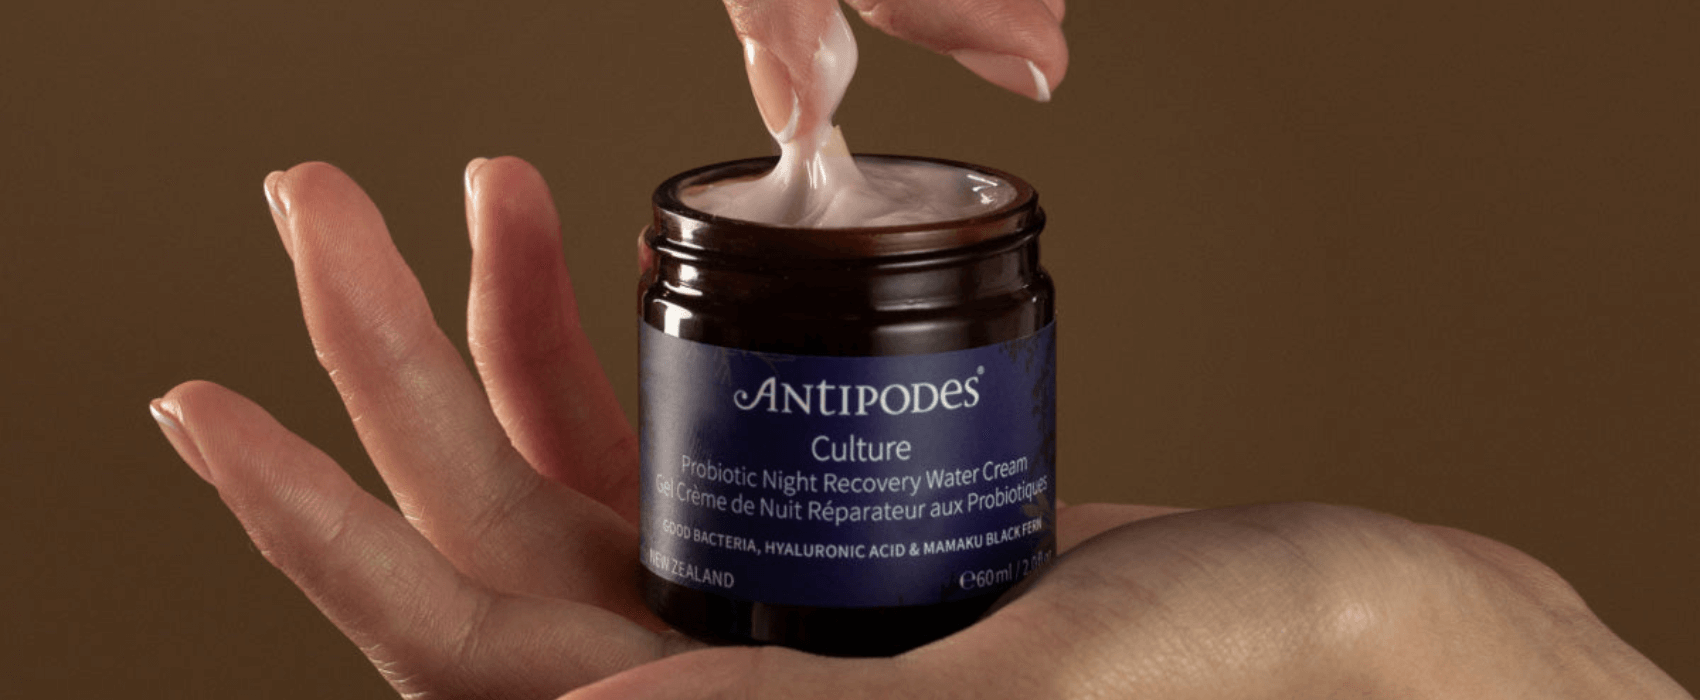 Blog - My favourite Antipodes products